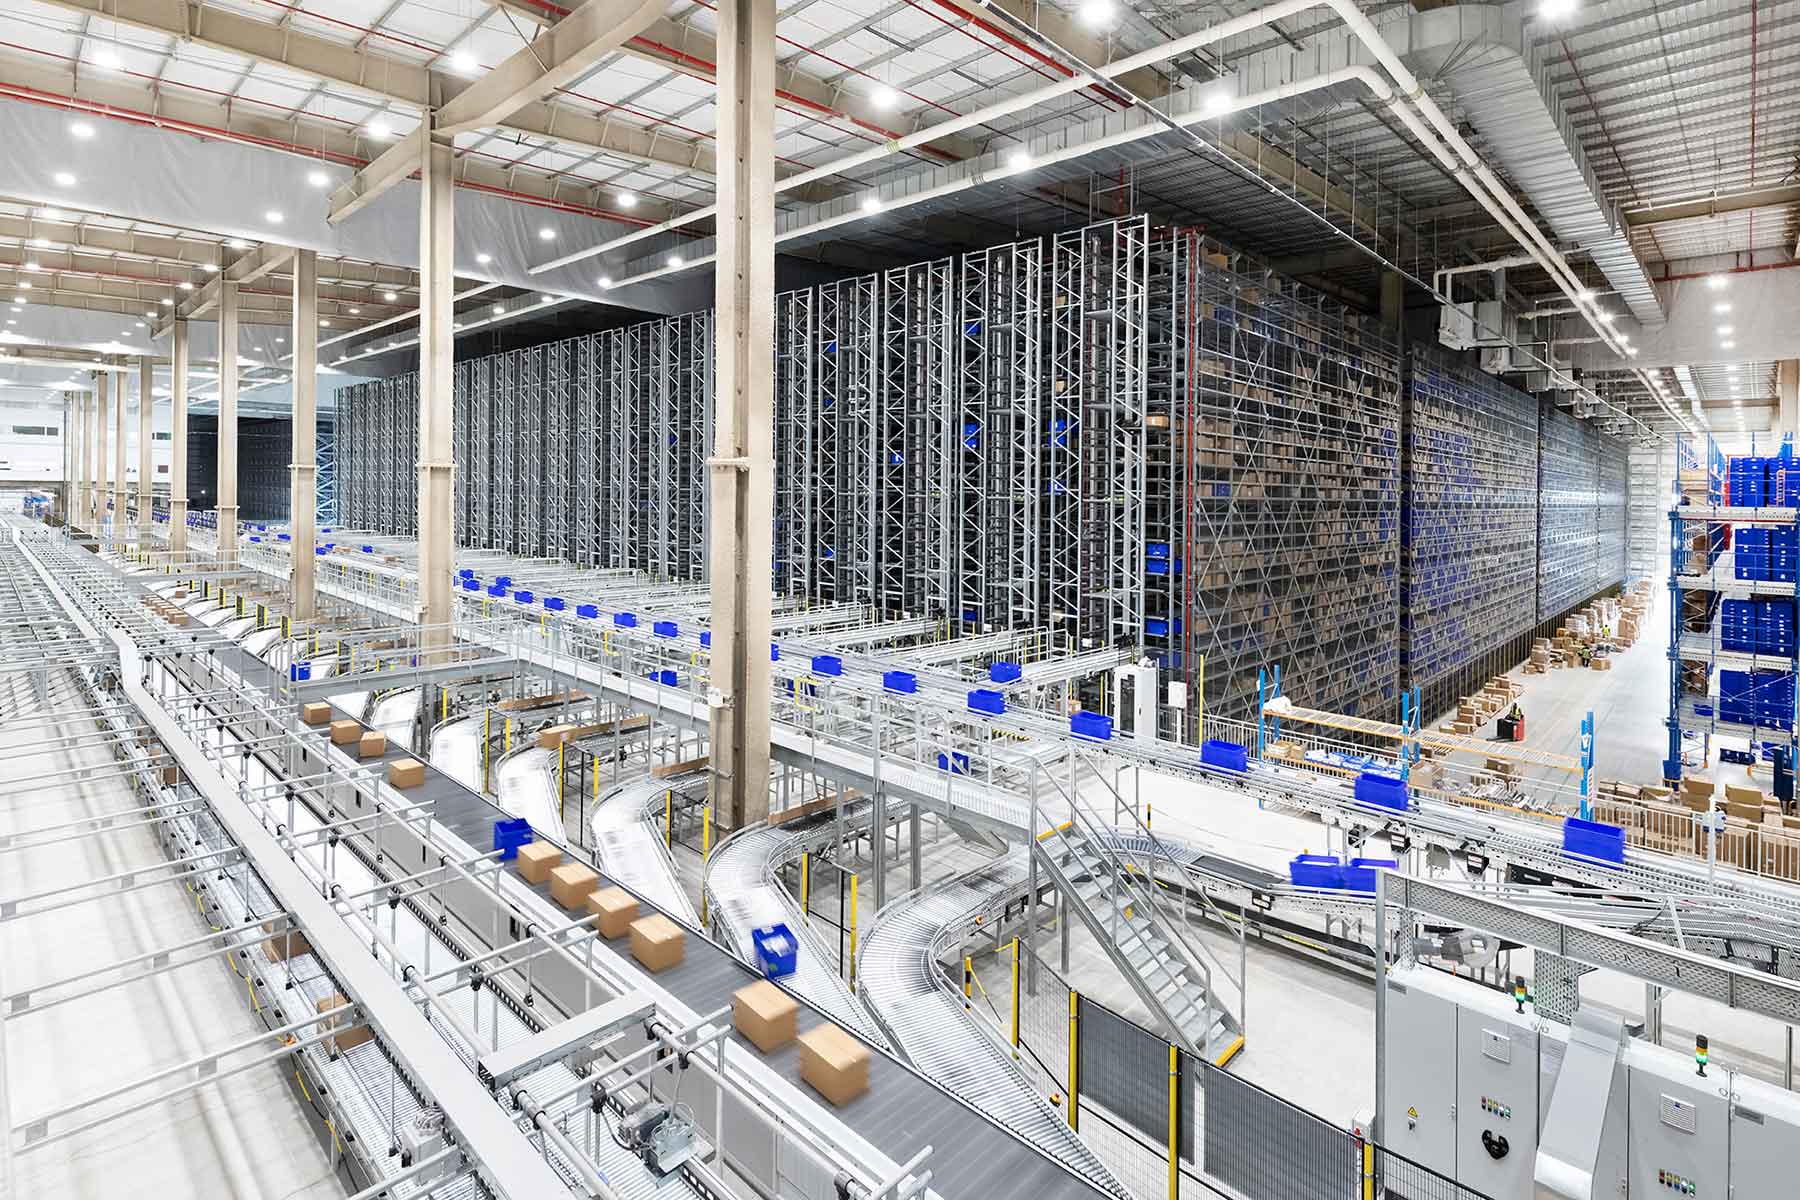 Dematic case study header image: of a dematic warehouse with boxes being sorted and stored